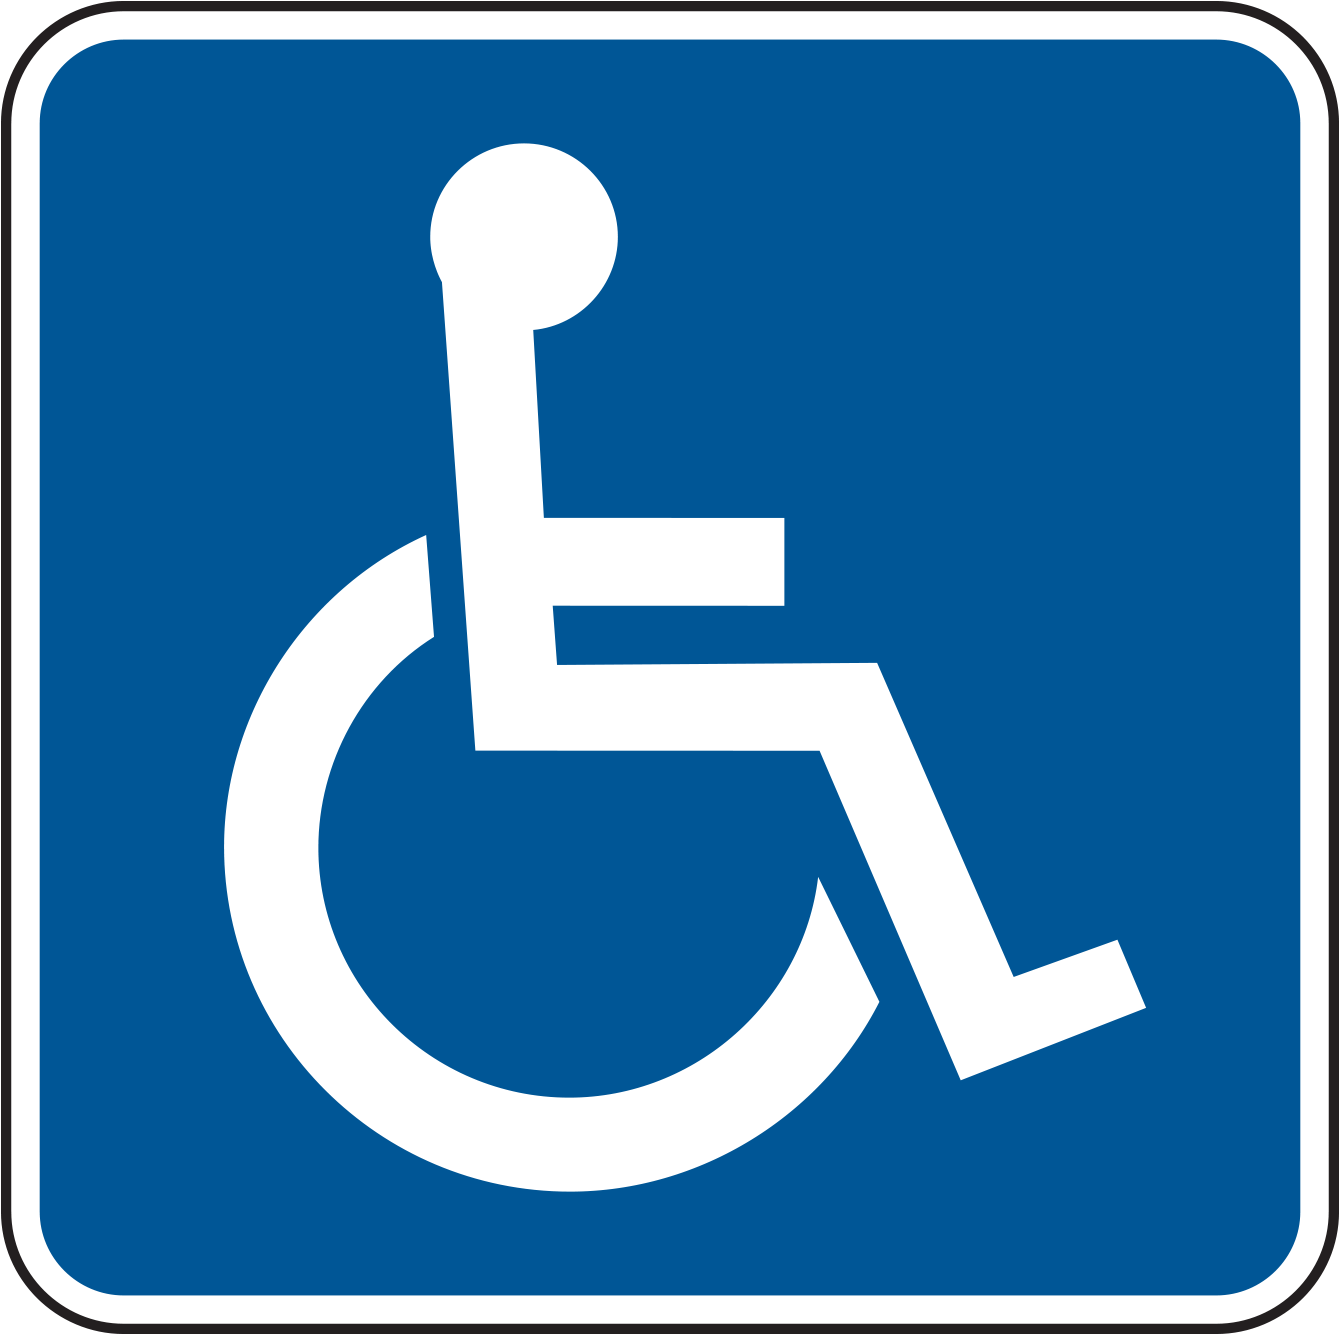 Universal symbol of Accessibility